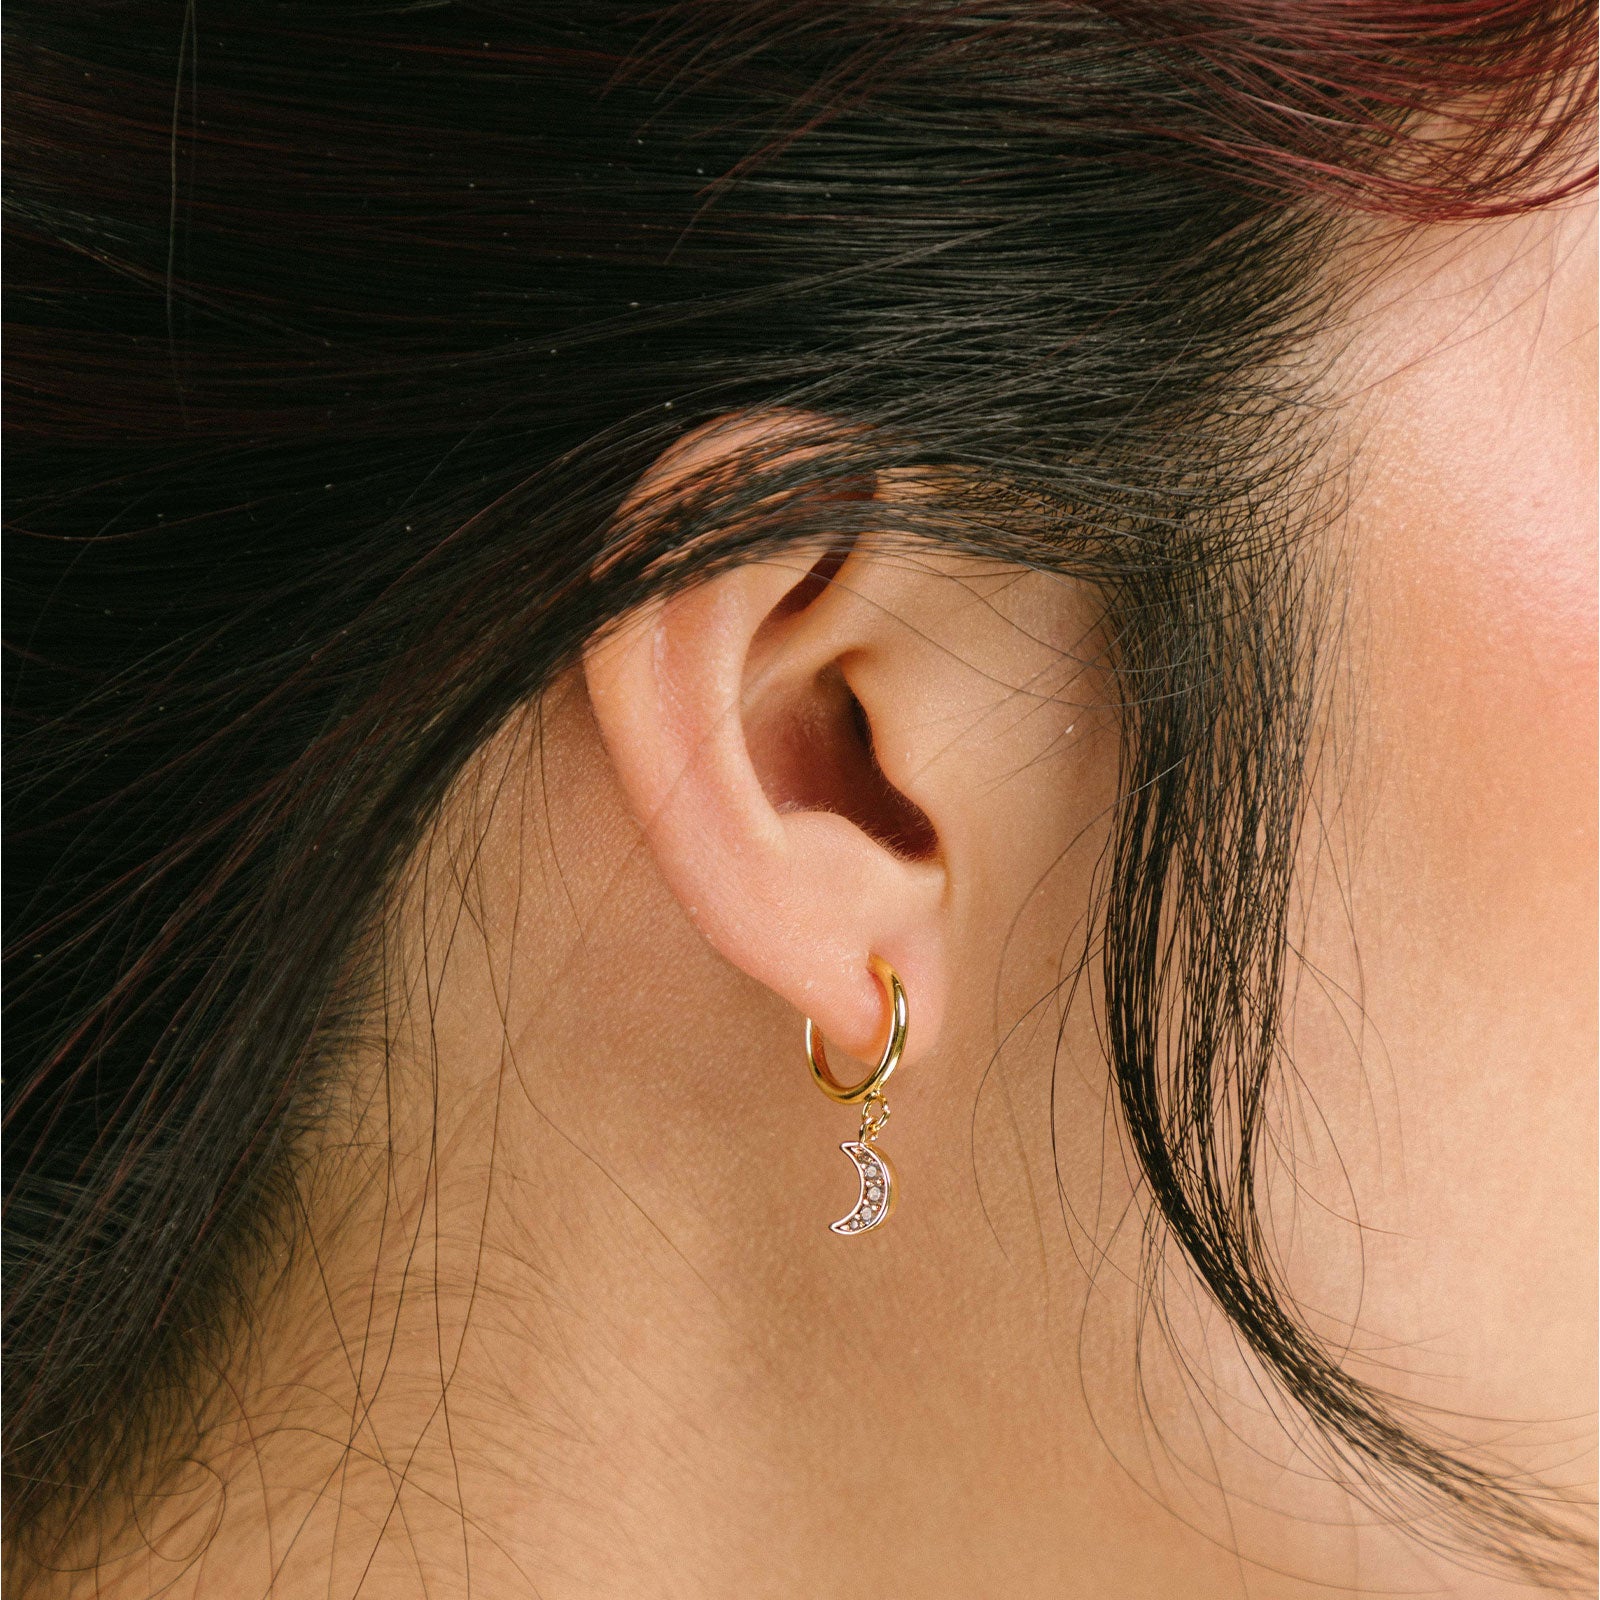 A model wearing the Moon Charm Clip on Earrings feature a sliding spring closure type, specifically designed for those with small or thinner ear lobes. This type of closure ensures a very secure hold and an adjustable fit to accommodate different ear thicknesses. Sold as a single pair, these earrings are crafted from brass and feature cubic zirconia details. Typically suitable for wear of 2-4 hours.